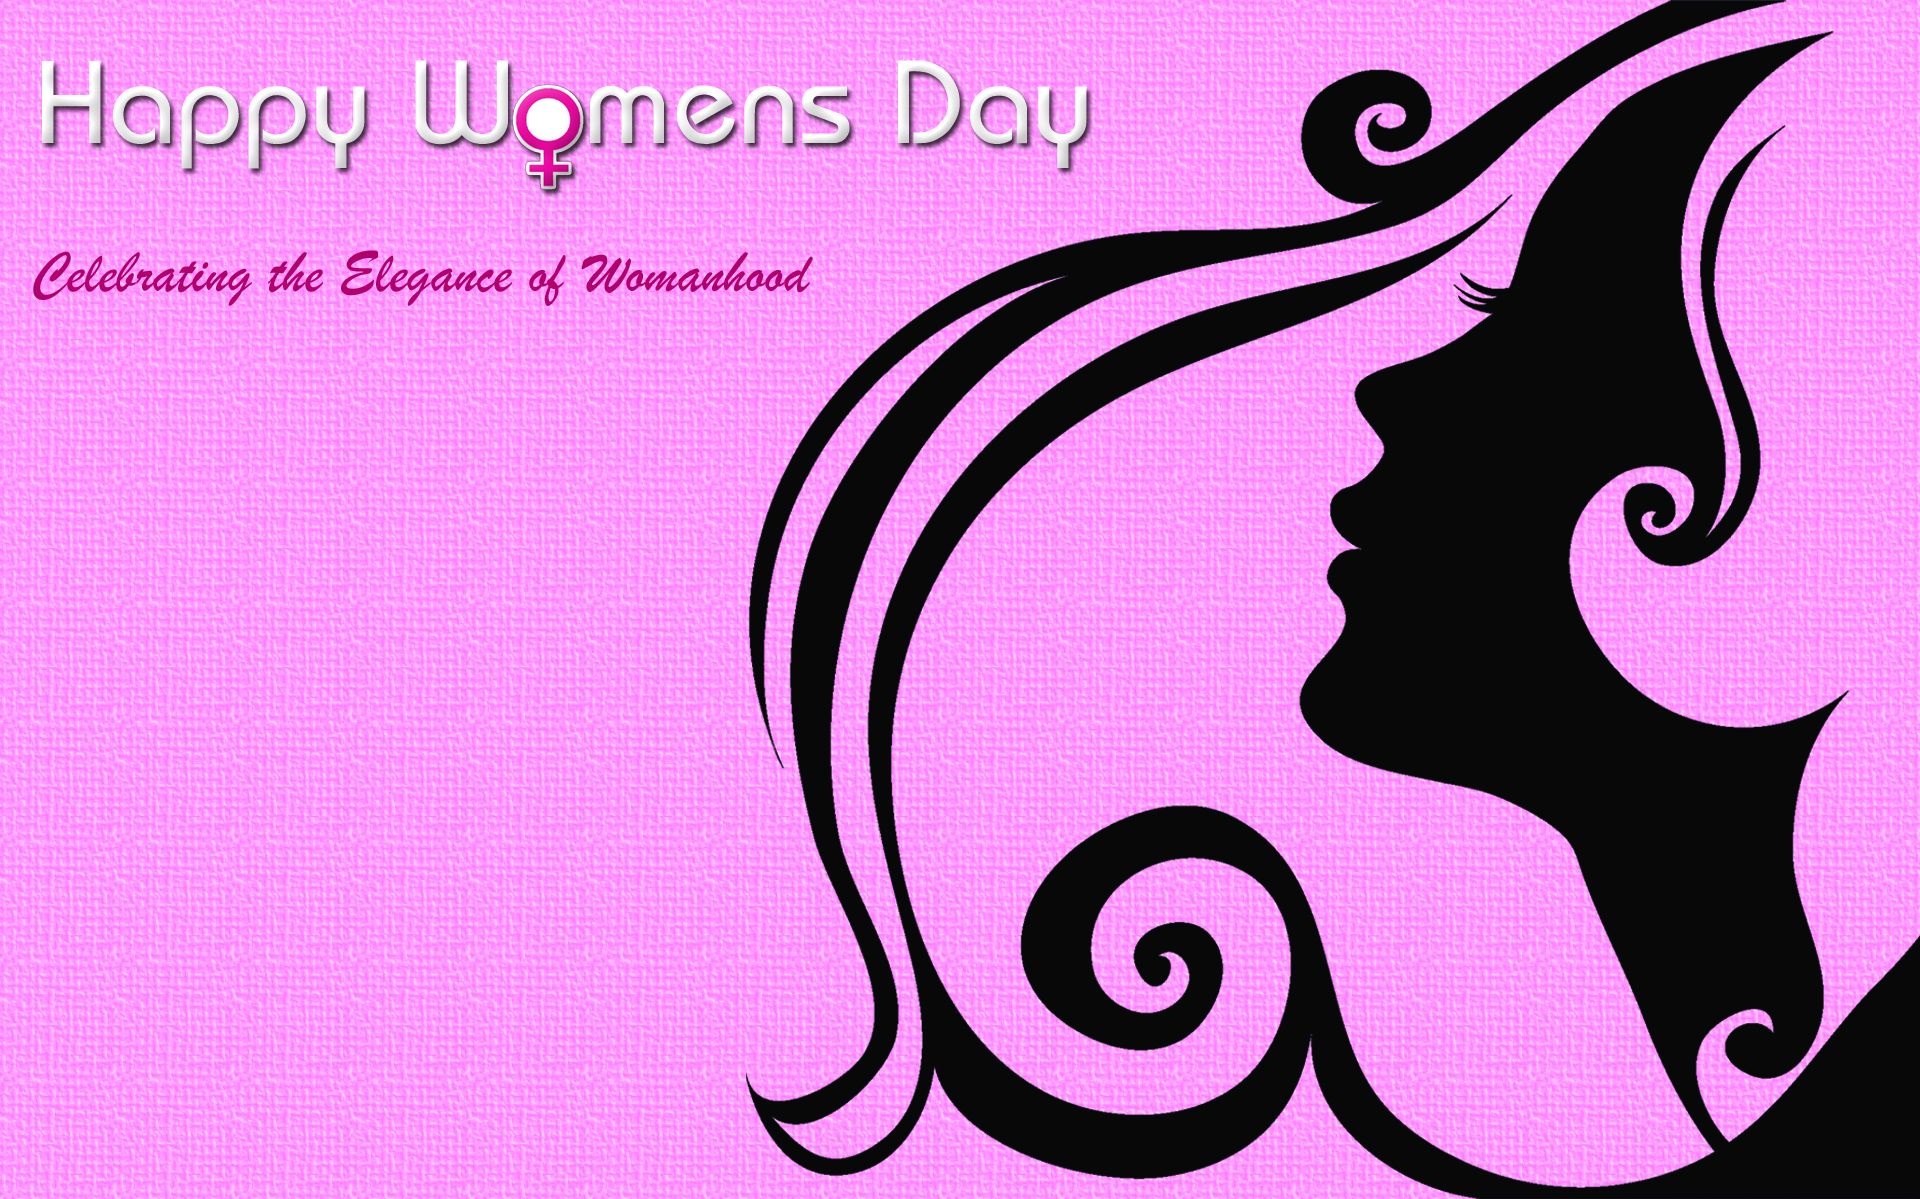 Happy Women's Day 2016 Images wallpapers (4)